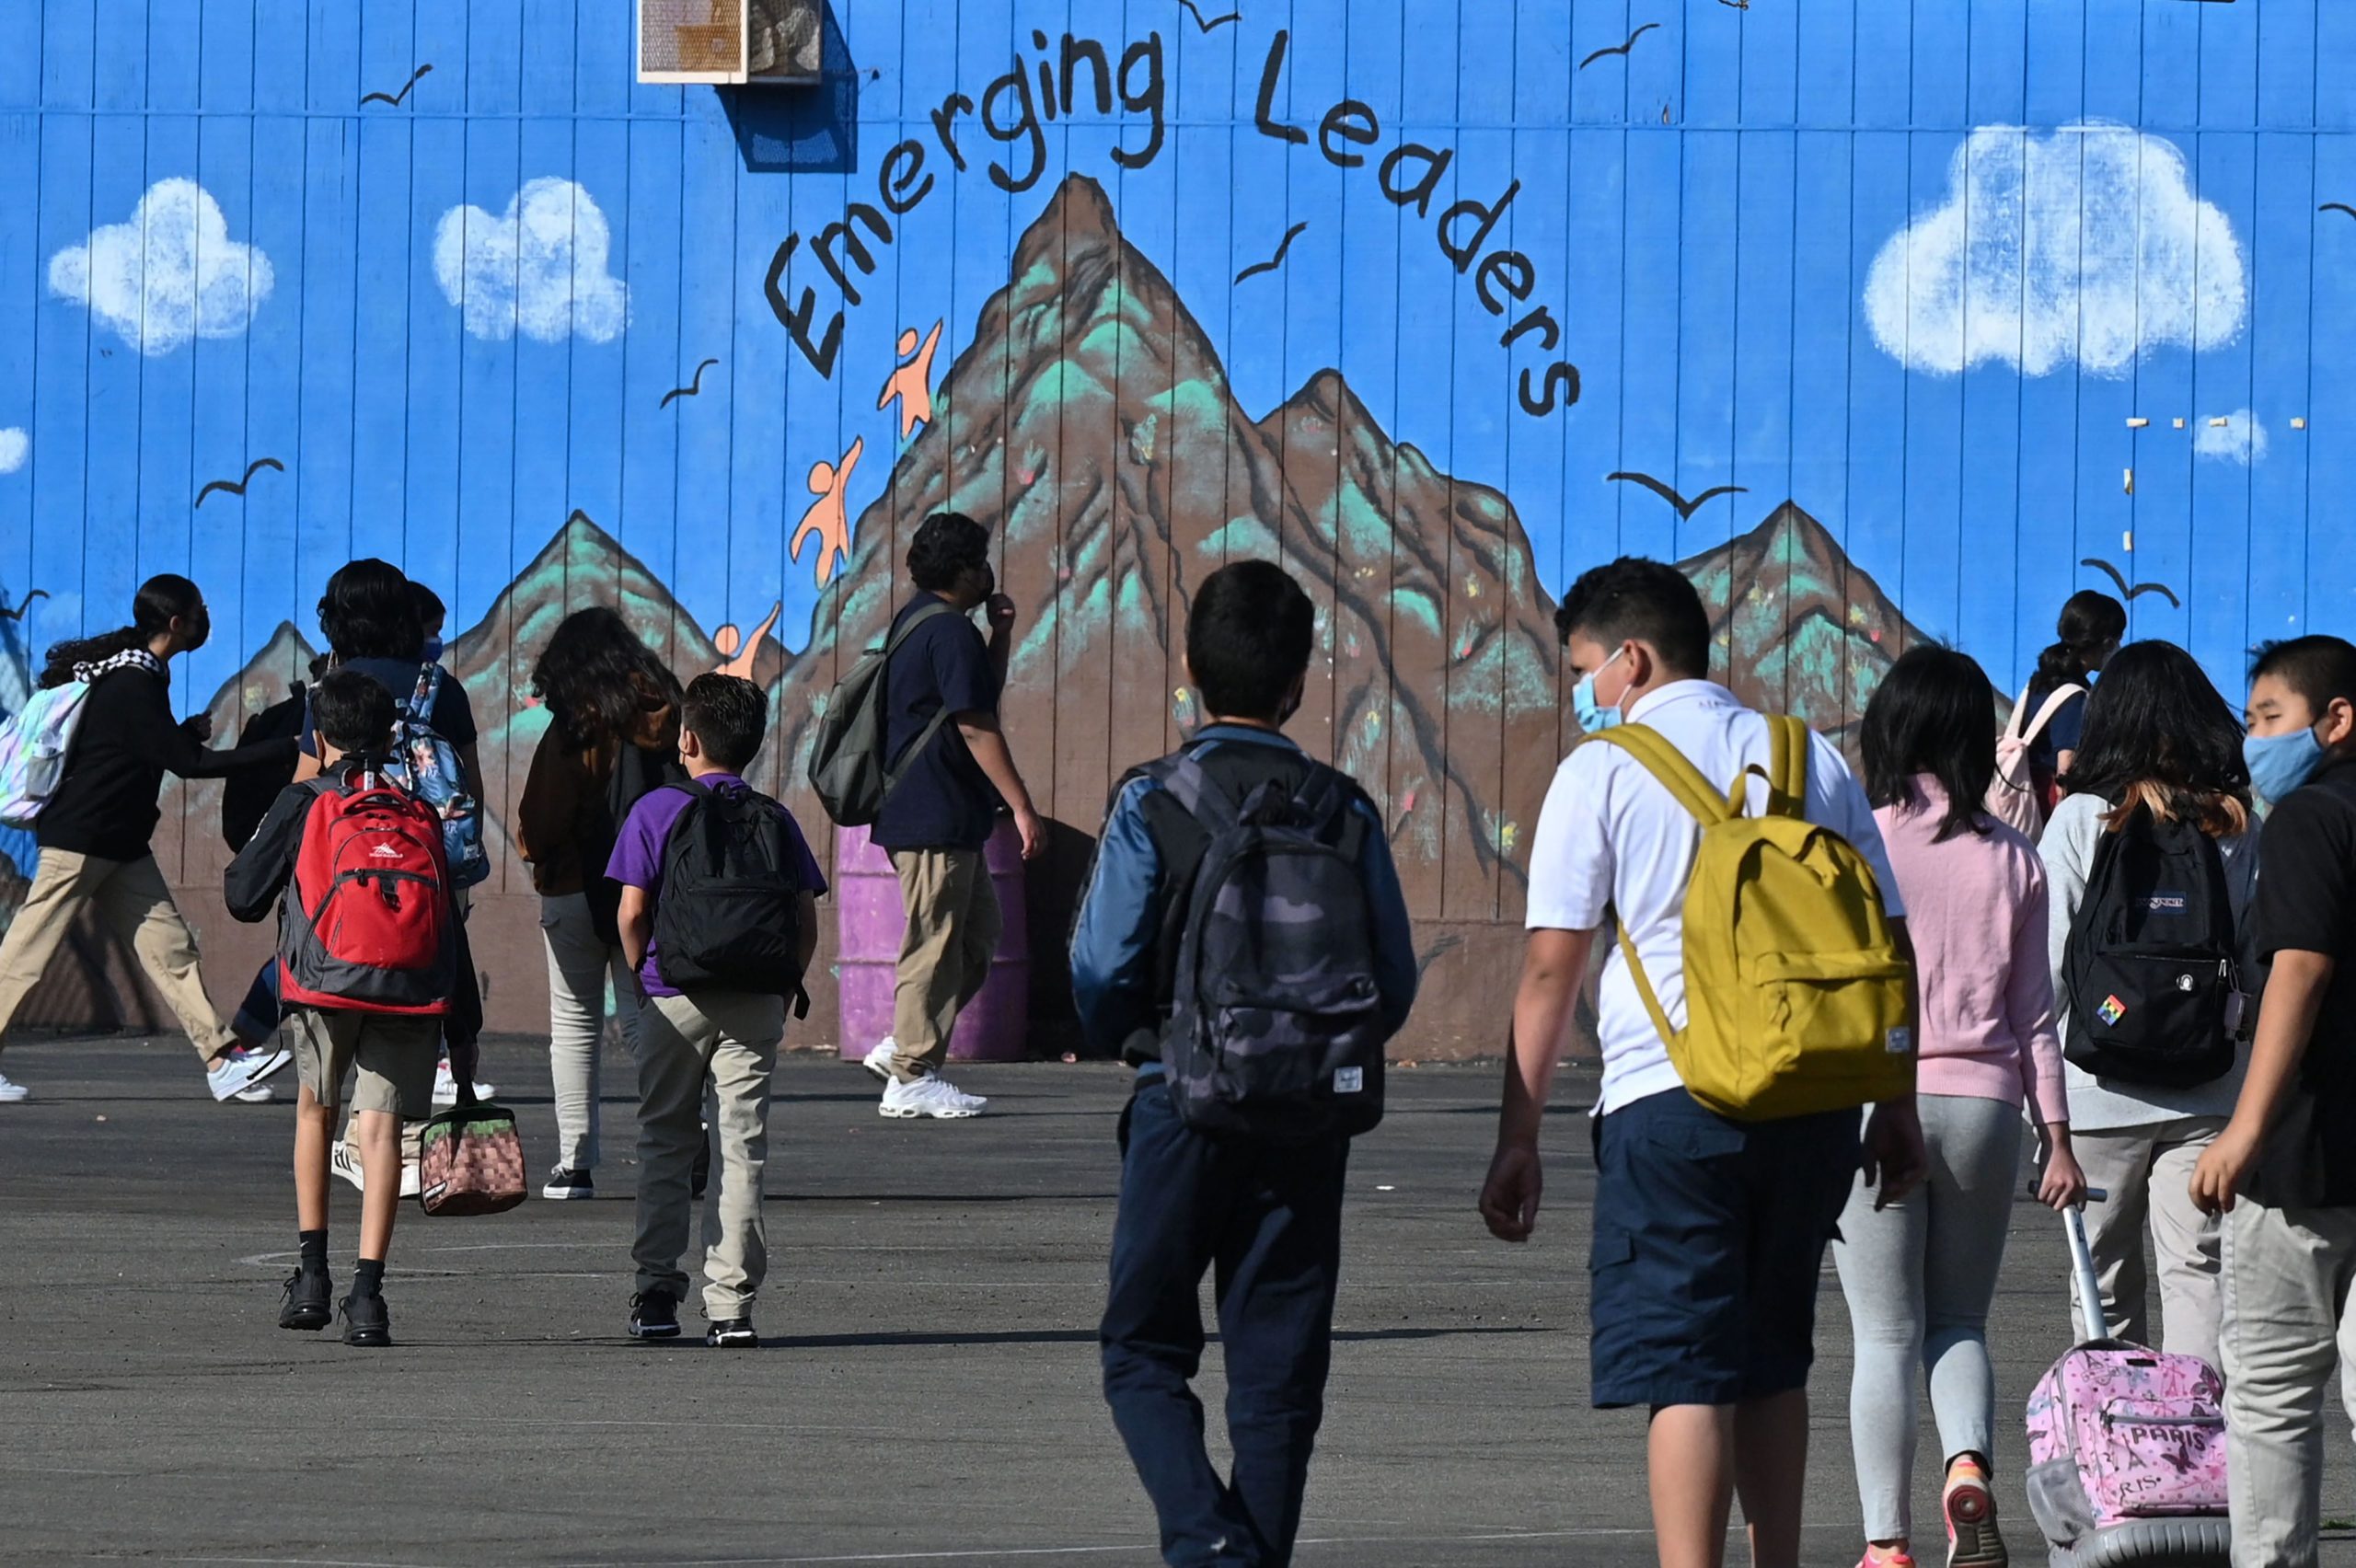 Students walk to their classrooms at a public middle school in Los Angeles, California, September 10, 2021. (Photo by ROBYN BECK/AFP via Getty Images)